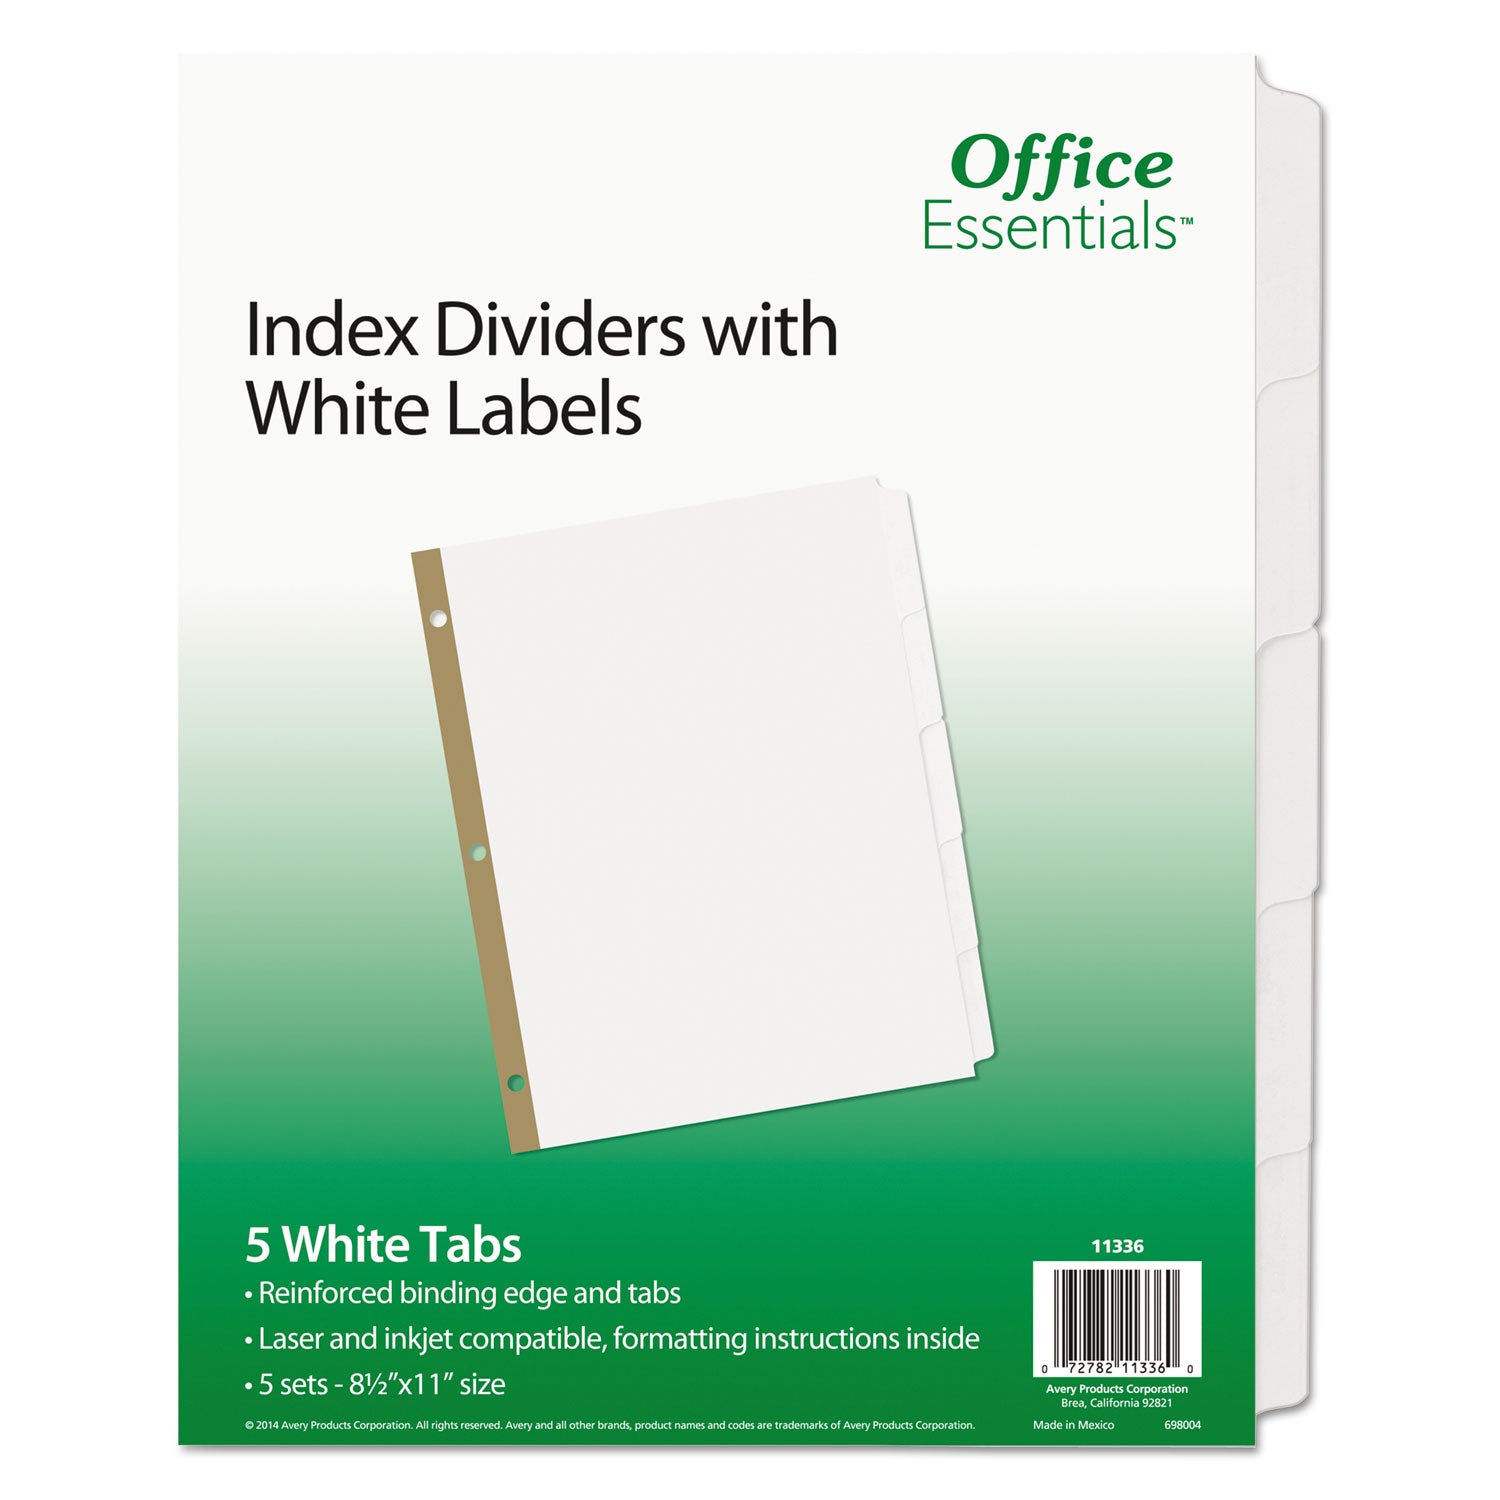 Index Dividers with White Labels, 5-Tab, 11 x 8.5, White, 5 Sets - 